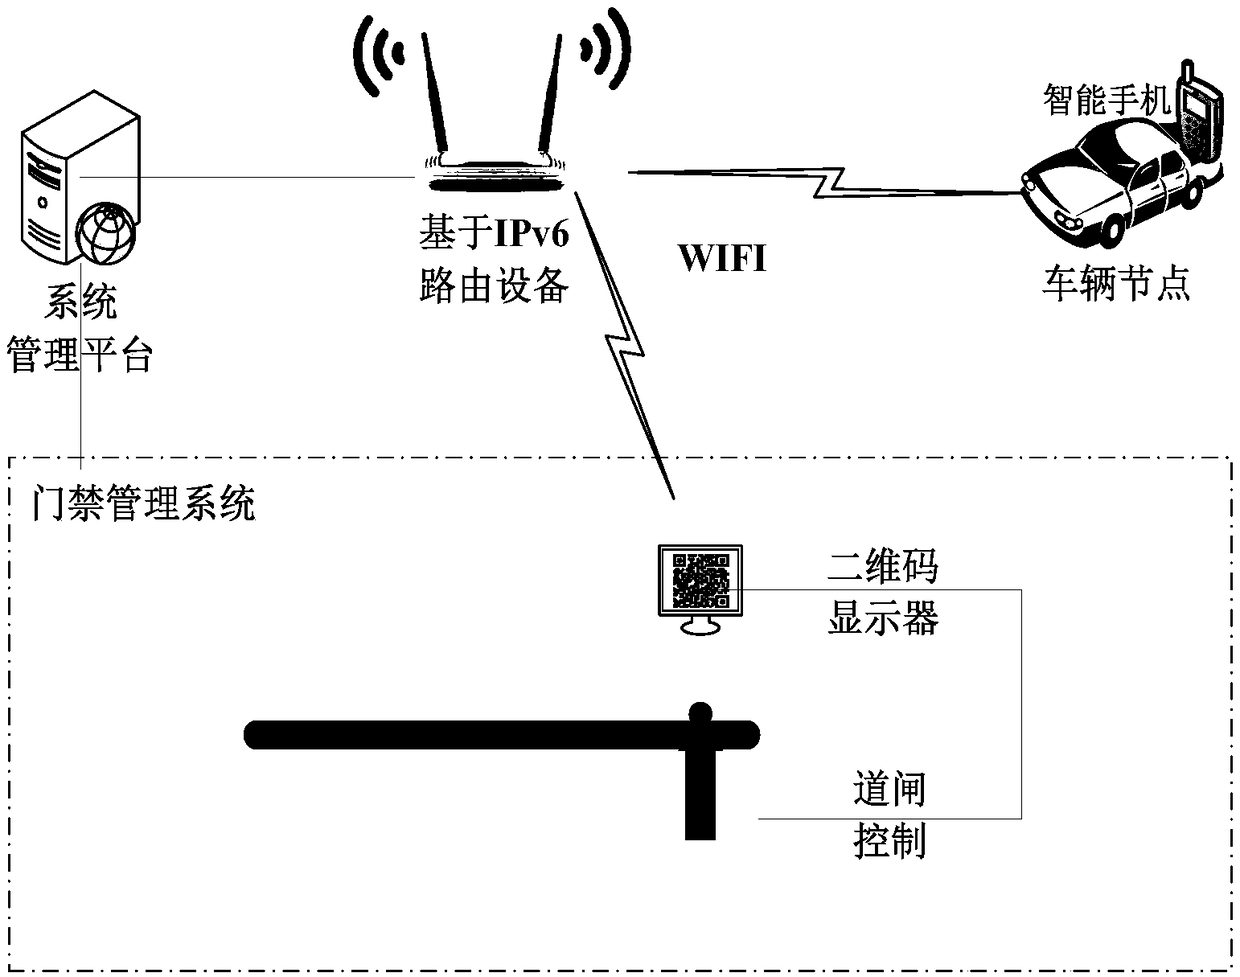 IPv6-based school foreign vehicle management and guide service system and method